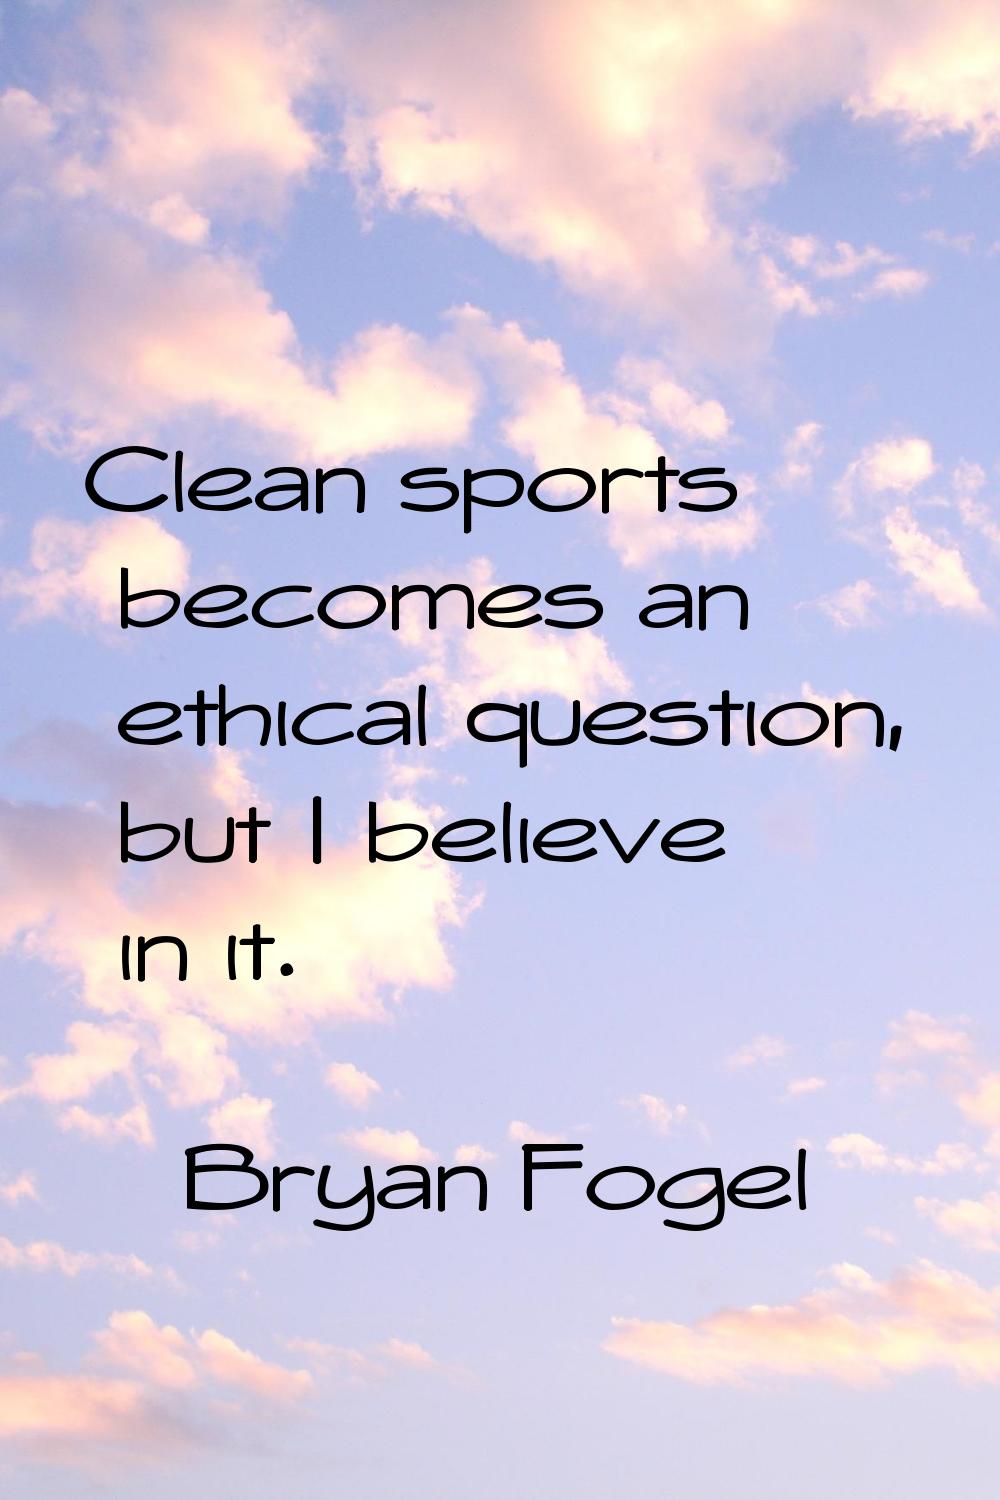 Clean sports becomes an ethical question, but I believe in it.